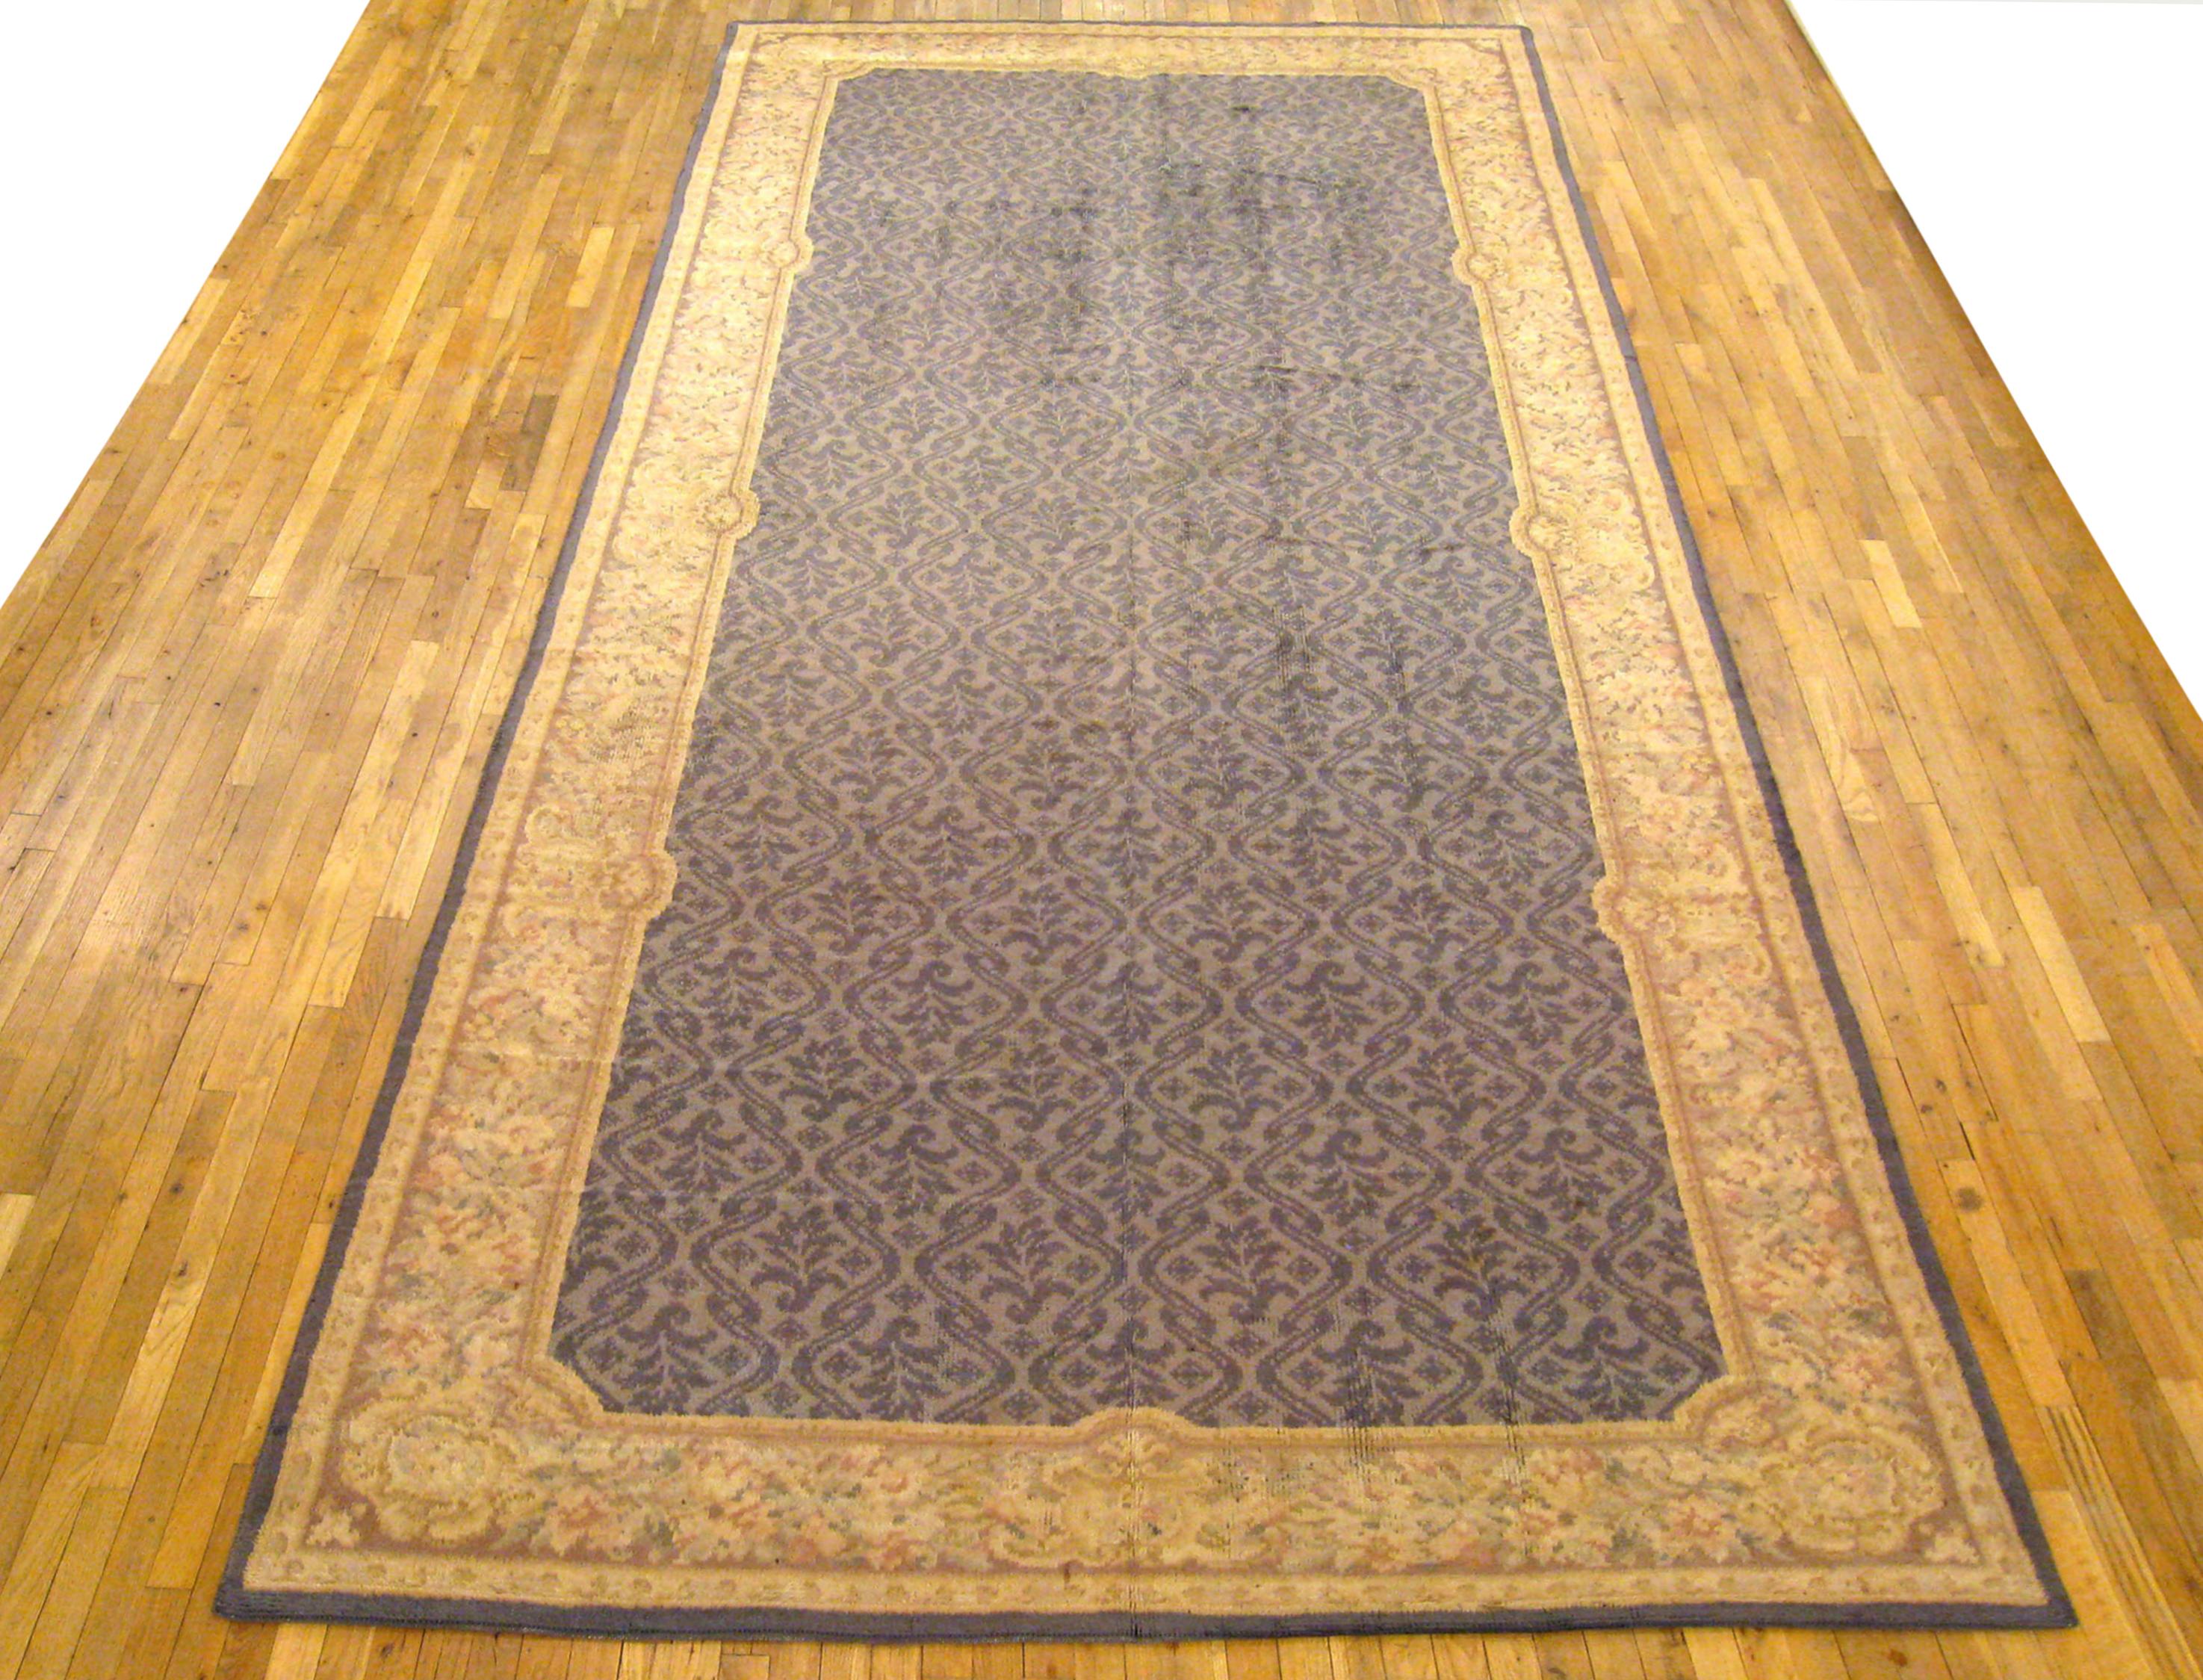 Antique Spanish Savonnerie Rug, Gallery size, circa 1930

A one-of-a-kind antique European Savonnerie Oriental Carpet, hand-knotted with short wool pile. This beautiful rug features a repeating design on the gray primary field, with beige outer